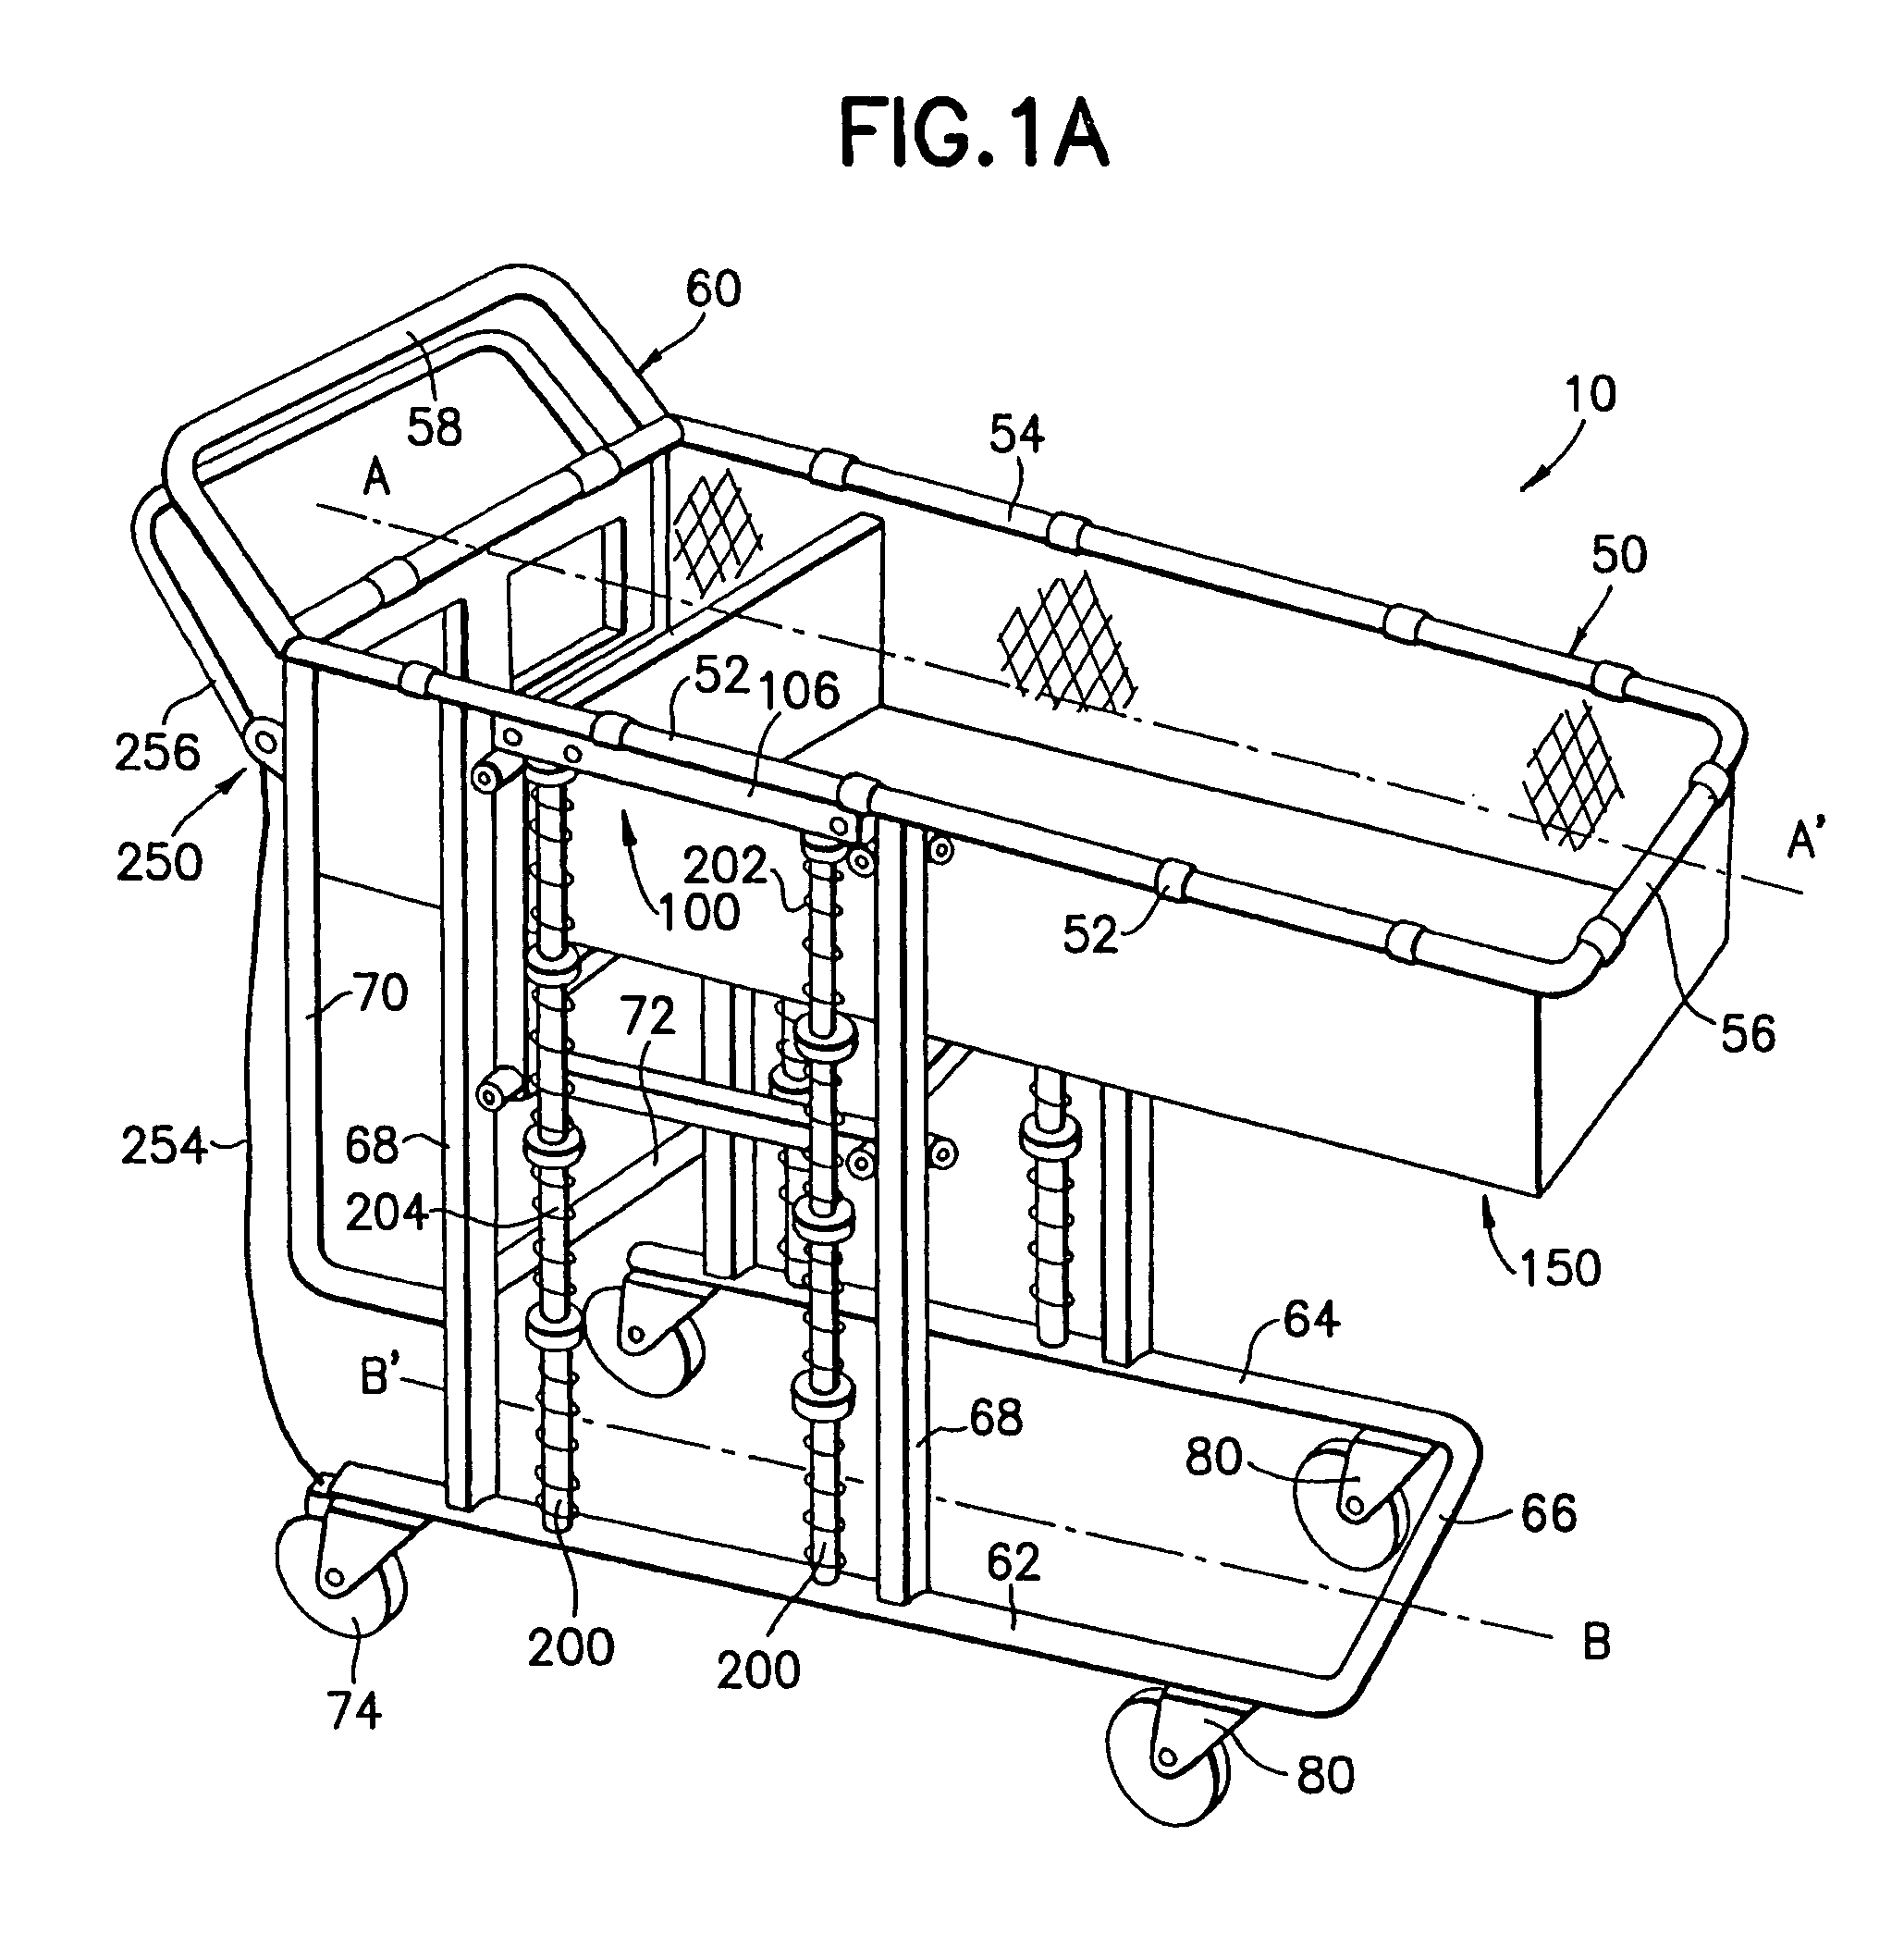 Transportation device having a basket with a movable floor